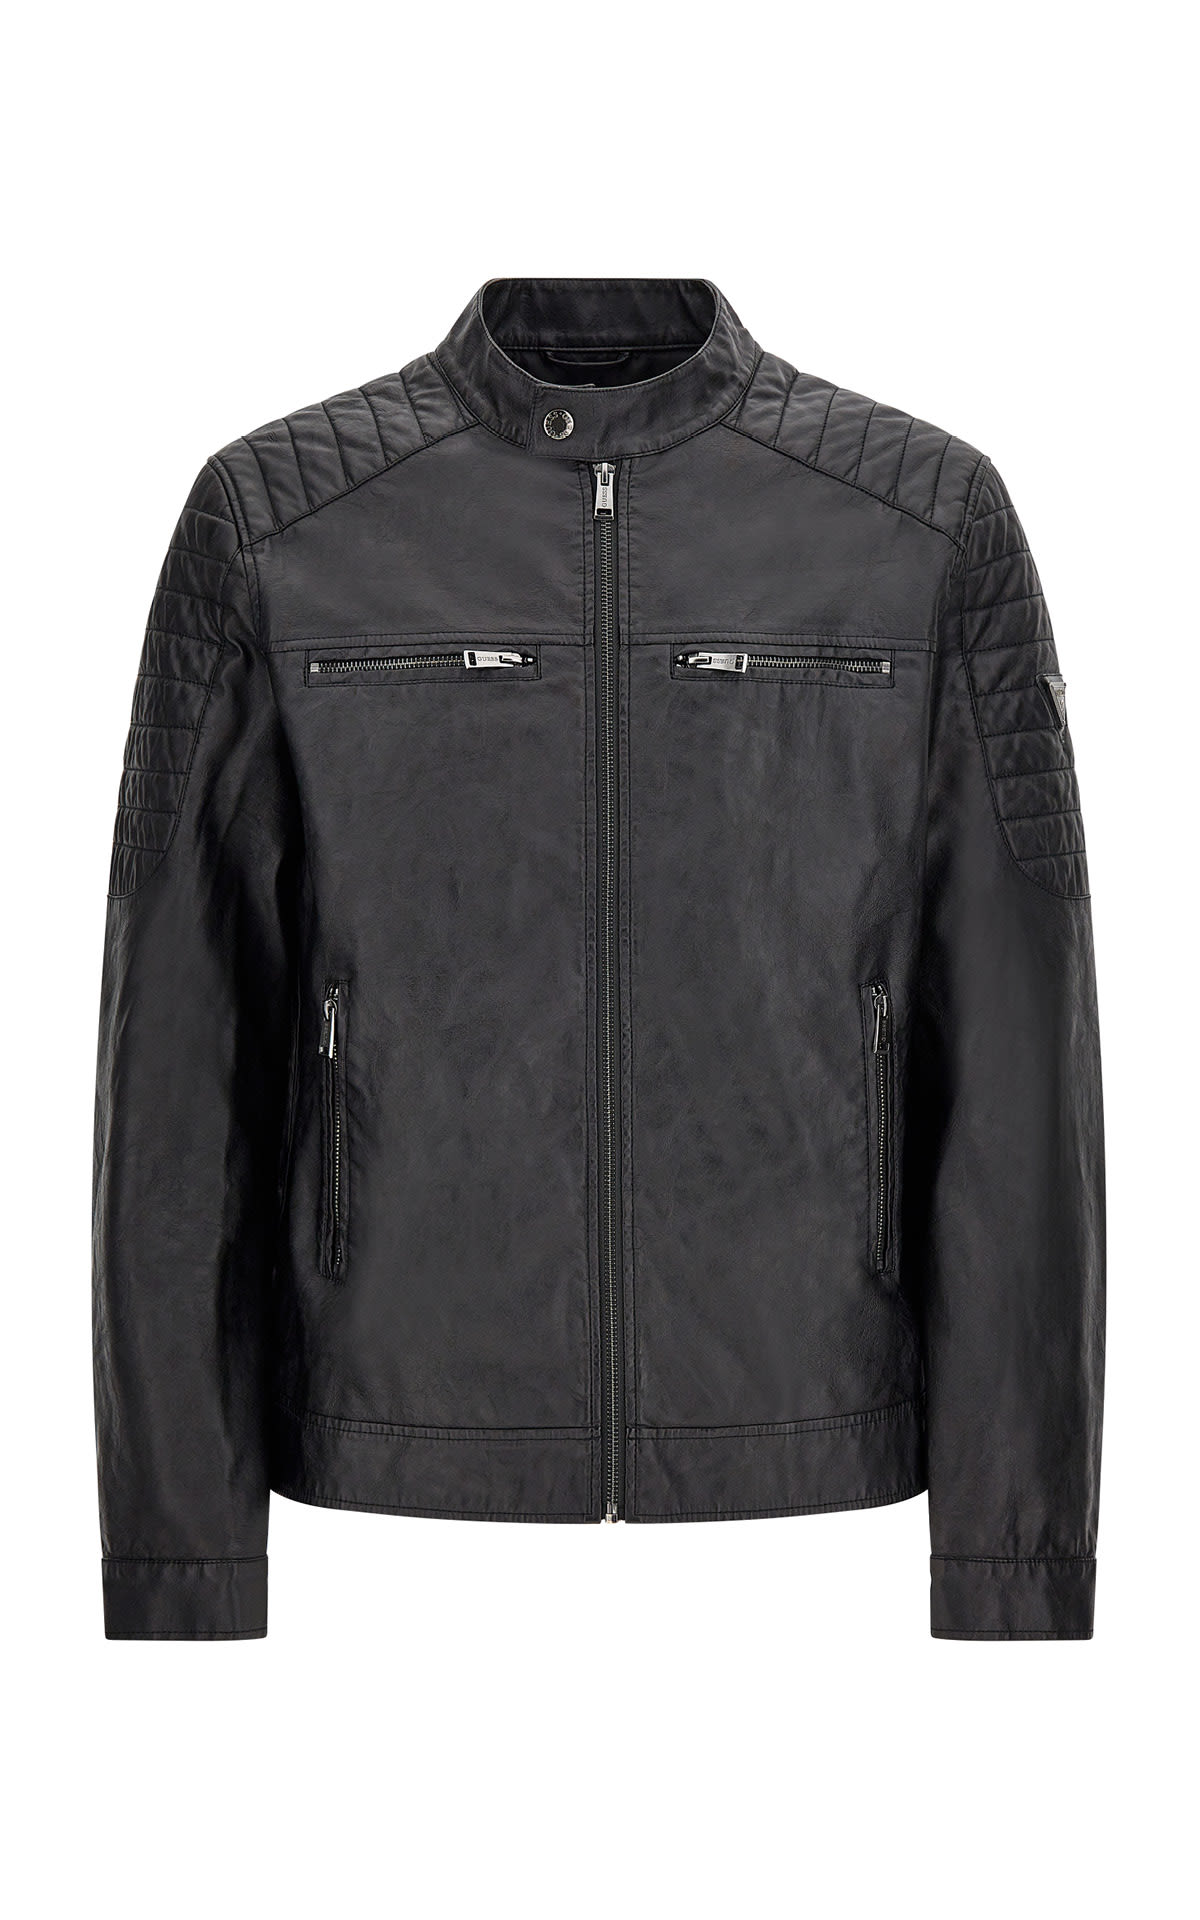 Guess Black leather jacket